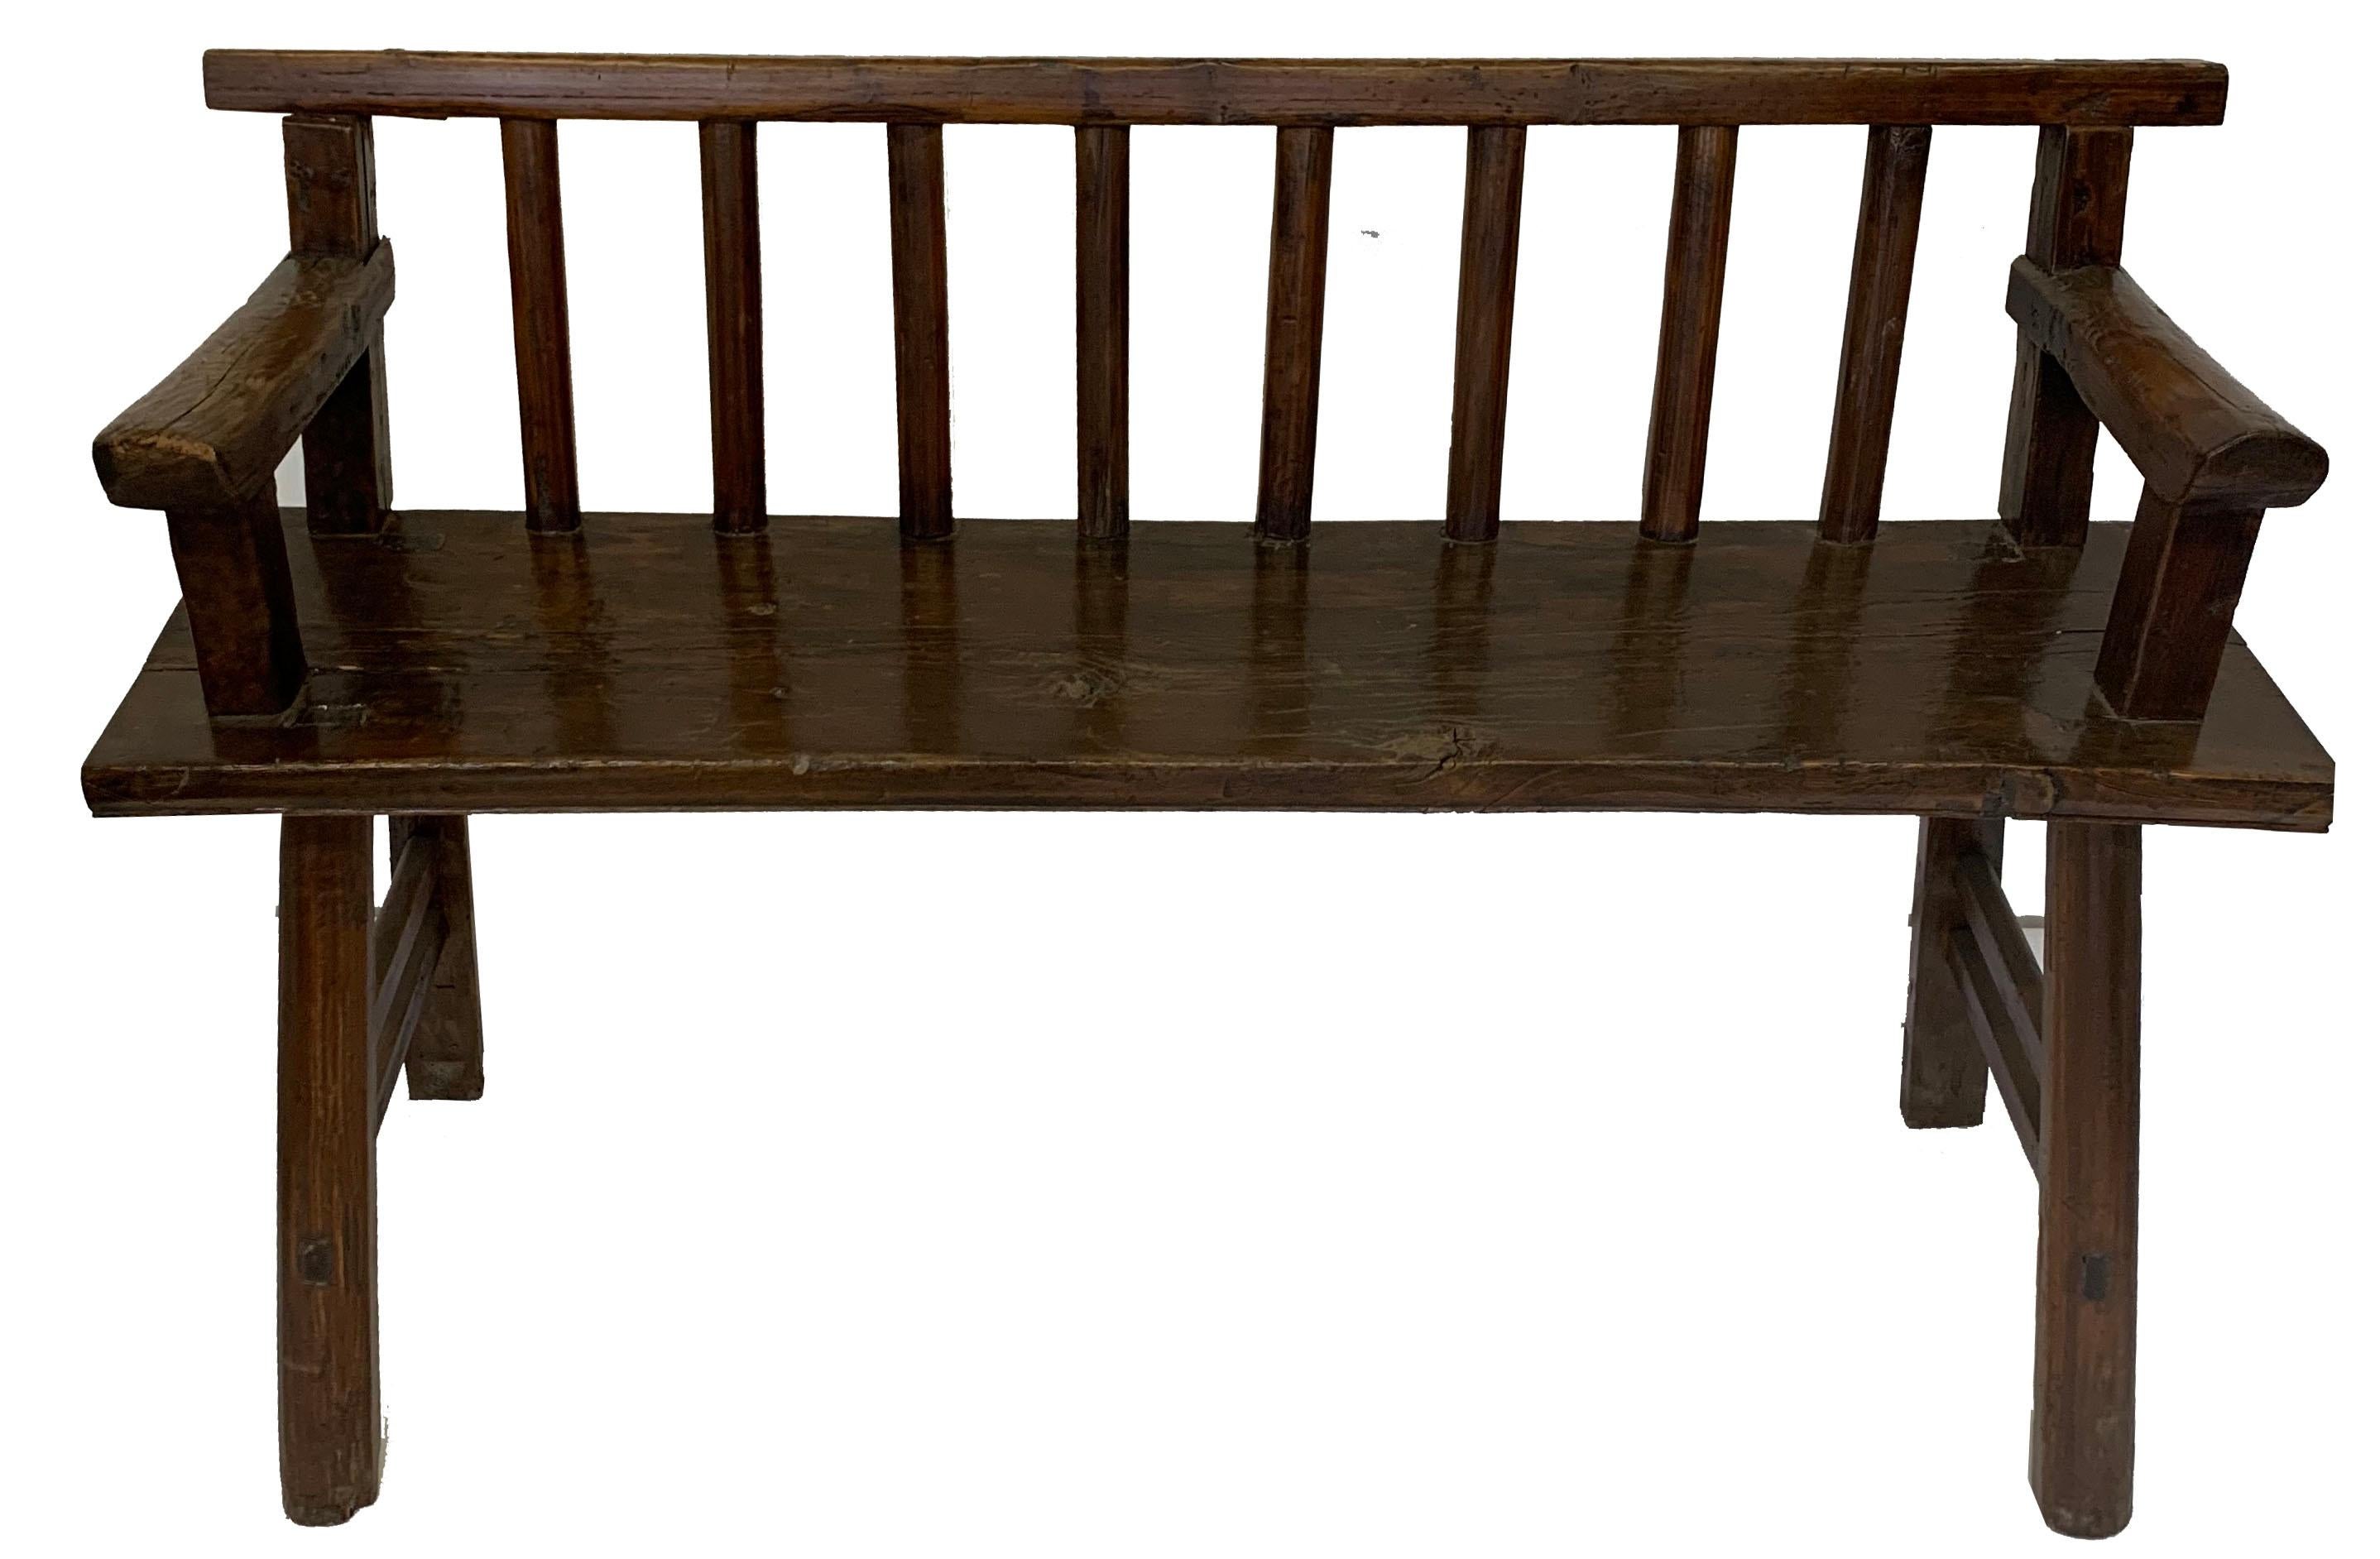 Japanese bench made out of solid wood. The bench has a higher seat which makes it perfect for an entry. 

Property from esteemed interior designer Juan Montoya. Juan Montoya is one of the most acclaimed and prolific interior designers in the world